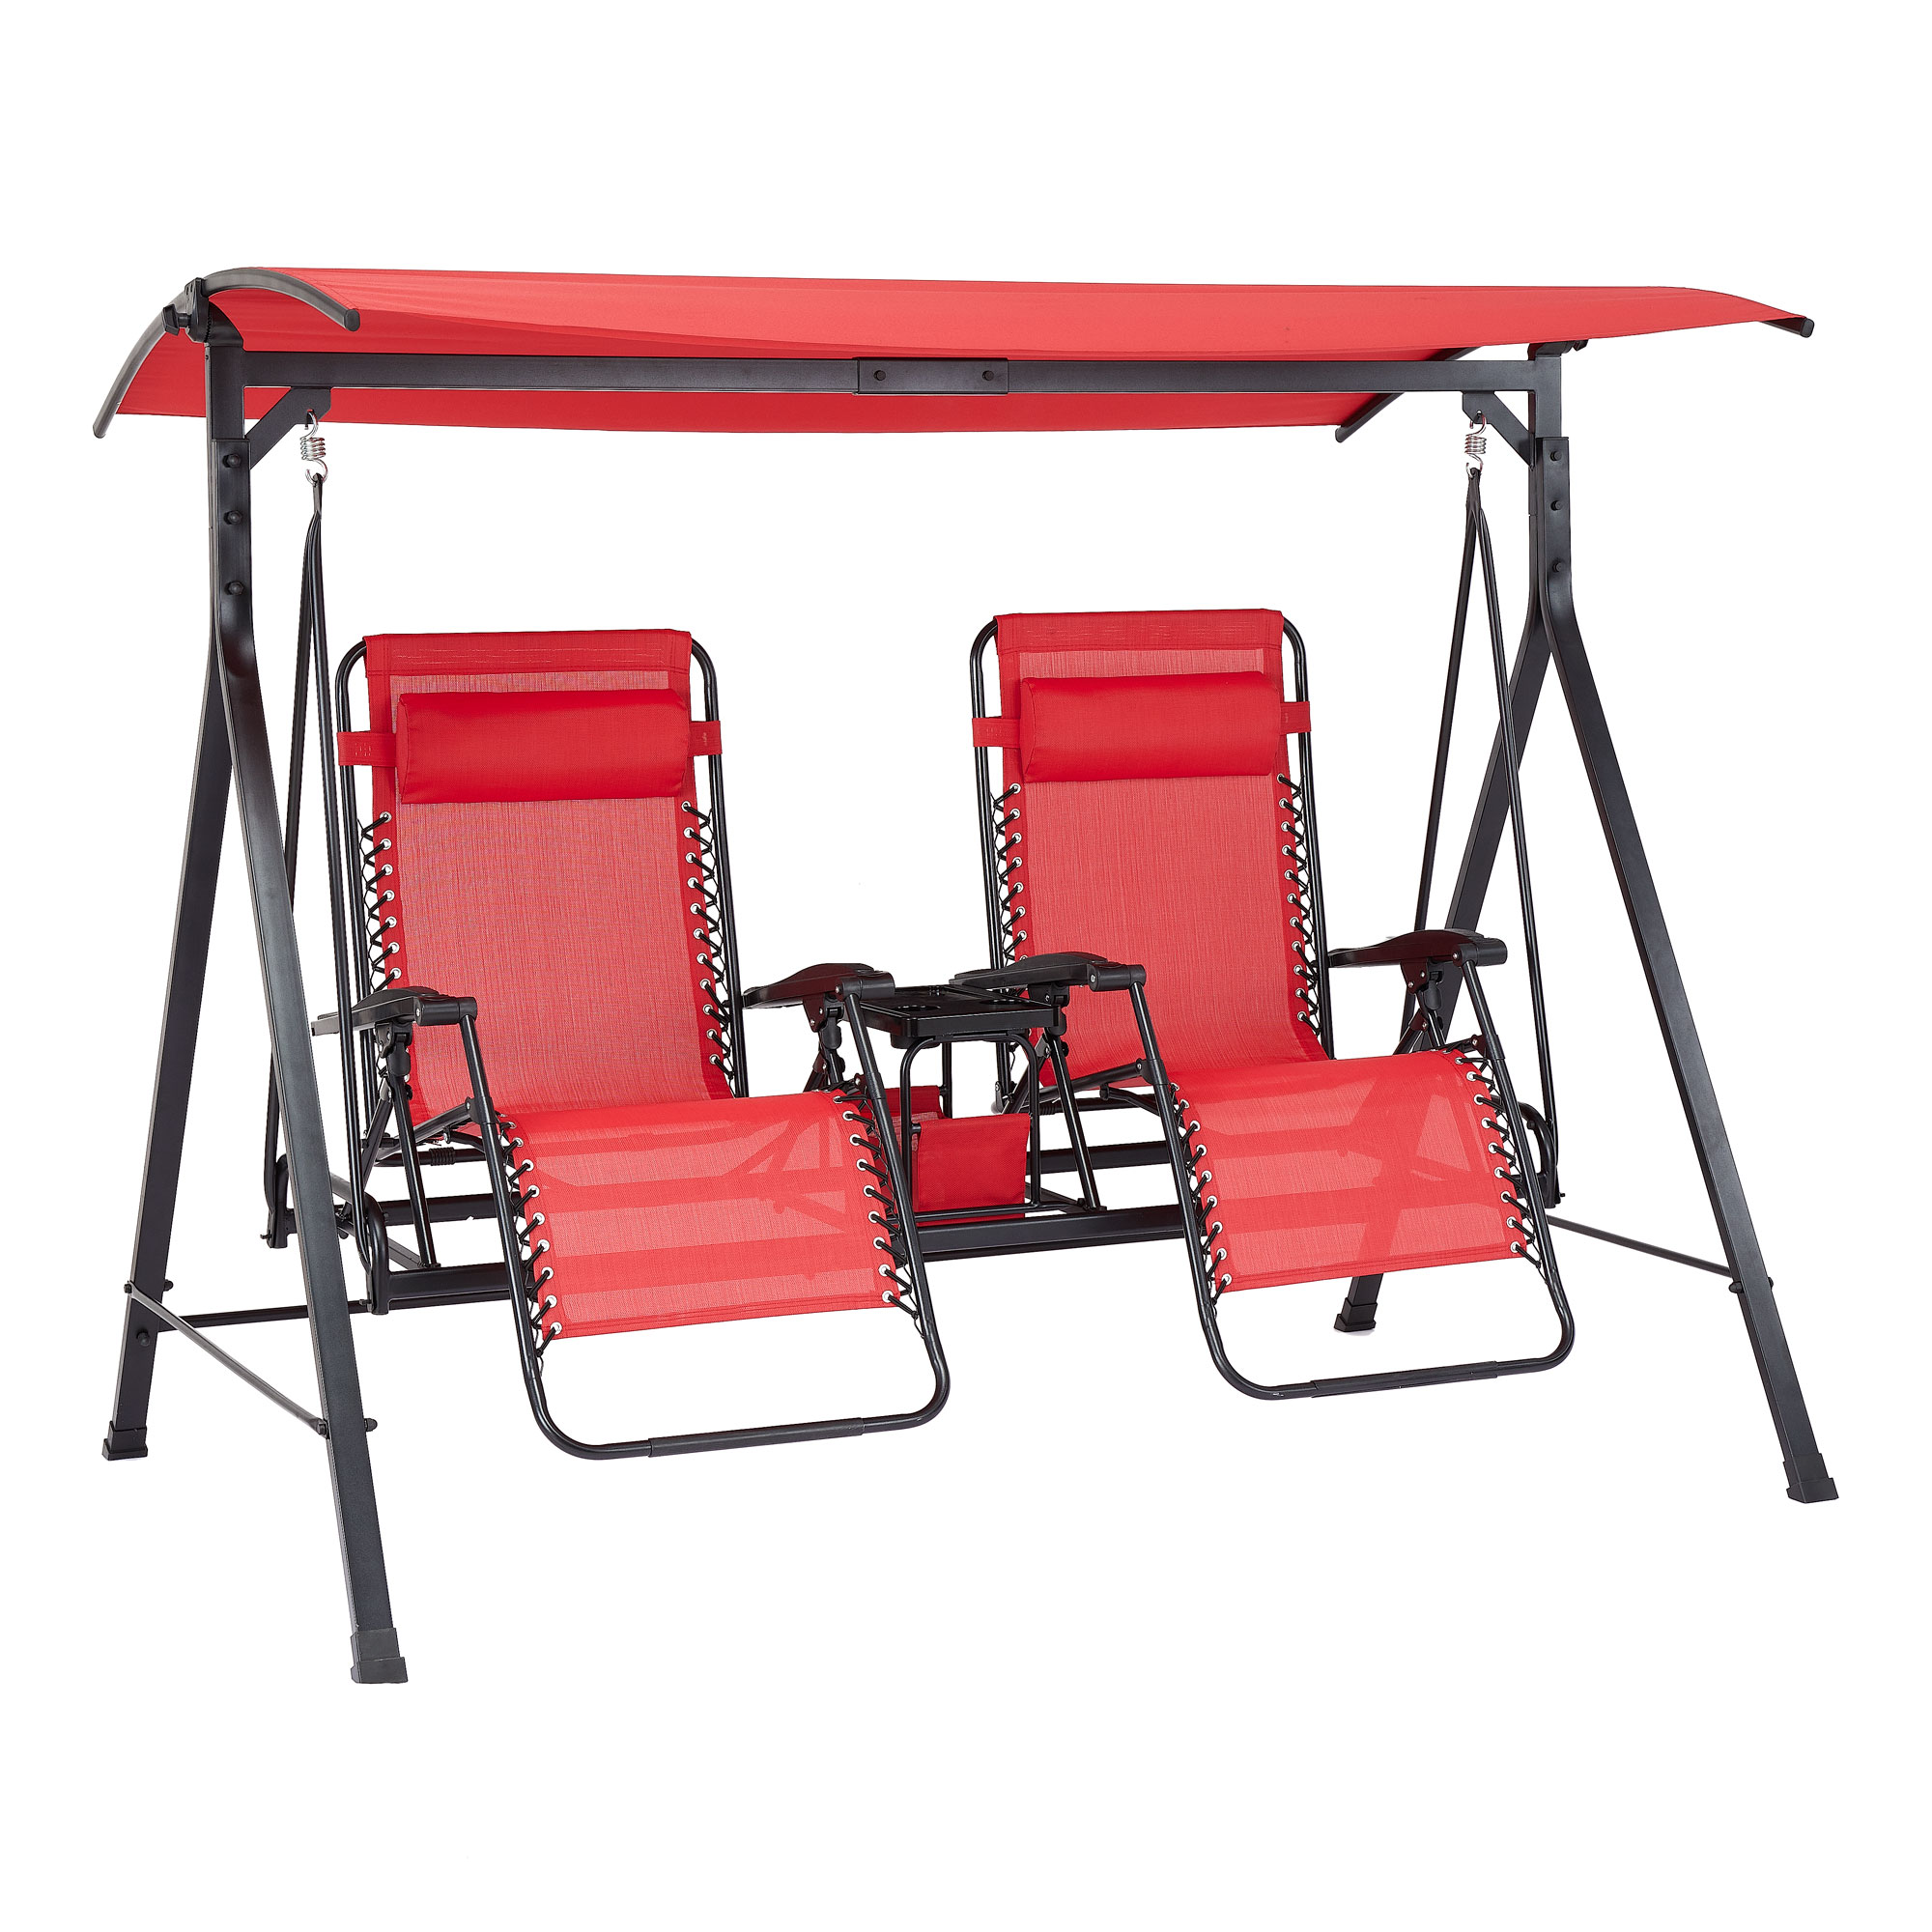 Mainstays 2-Seat Reclining Oversized Zero-Gravity Swing with Canopy and Center Storage Console, Red/Black - image 2 of 9